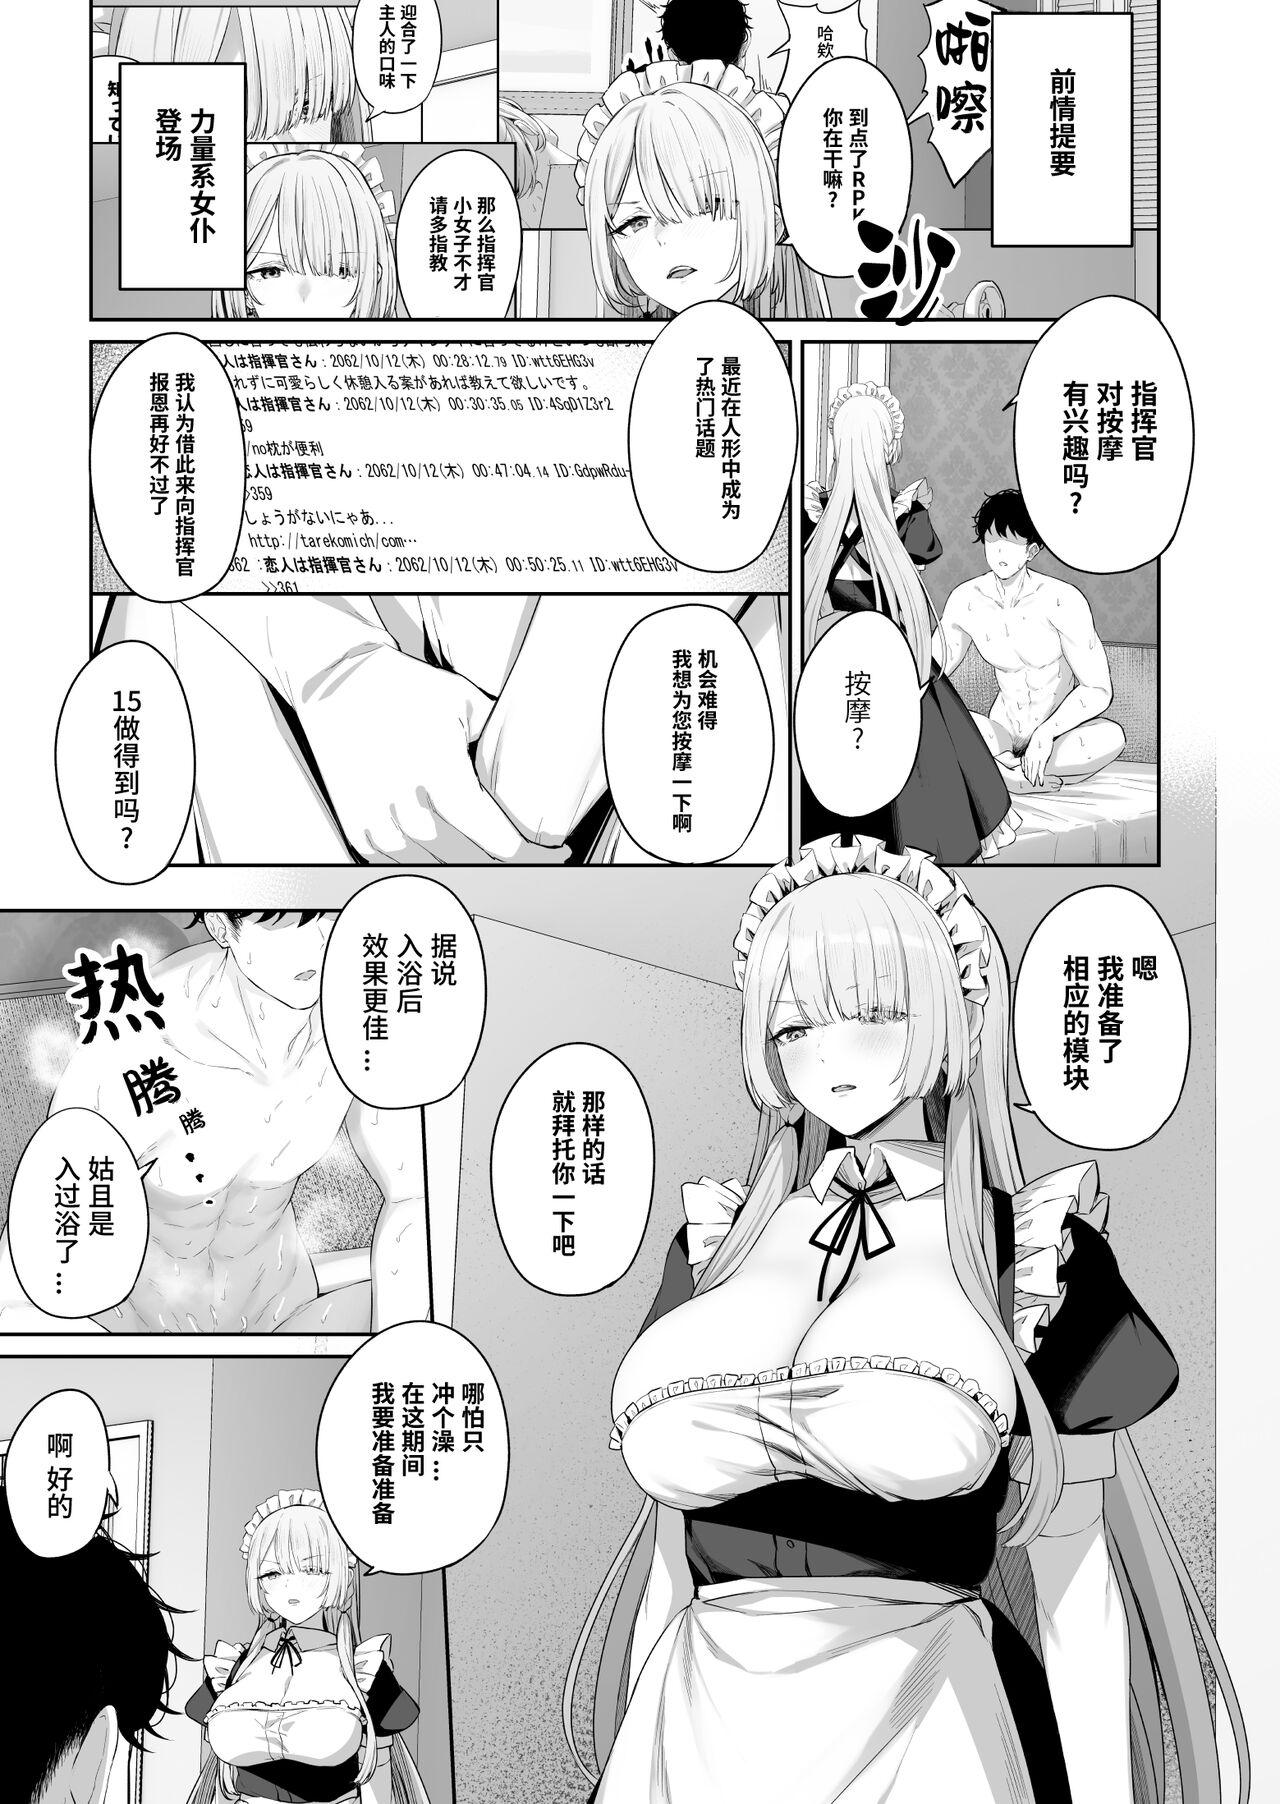 Price AK15の進捗1 - Girls frontline Massages - Page 2